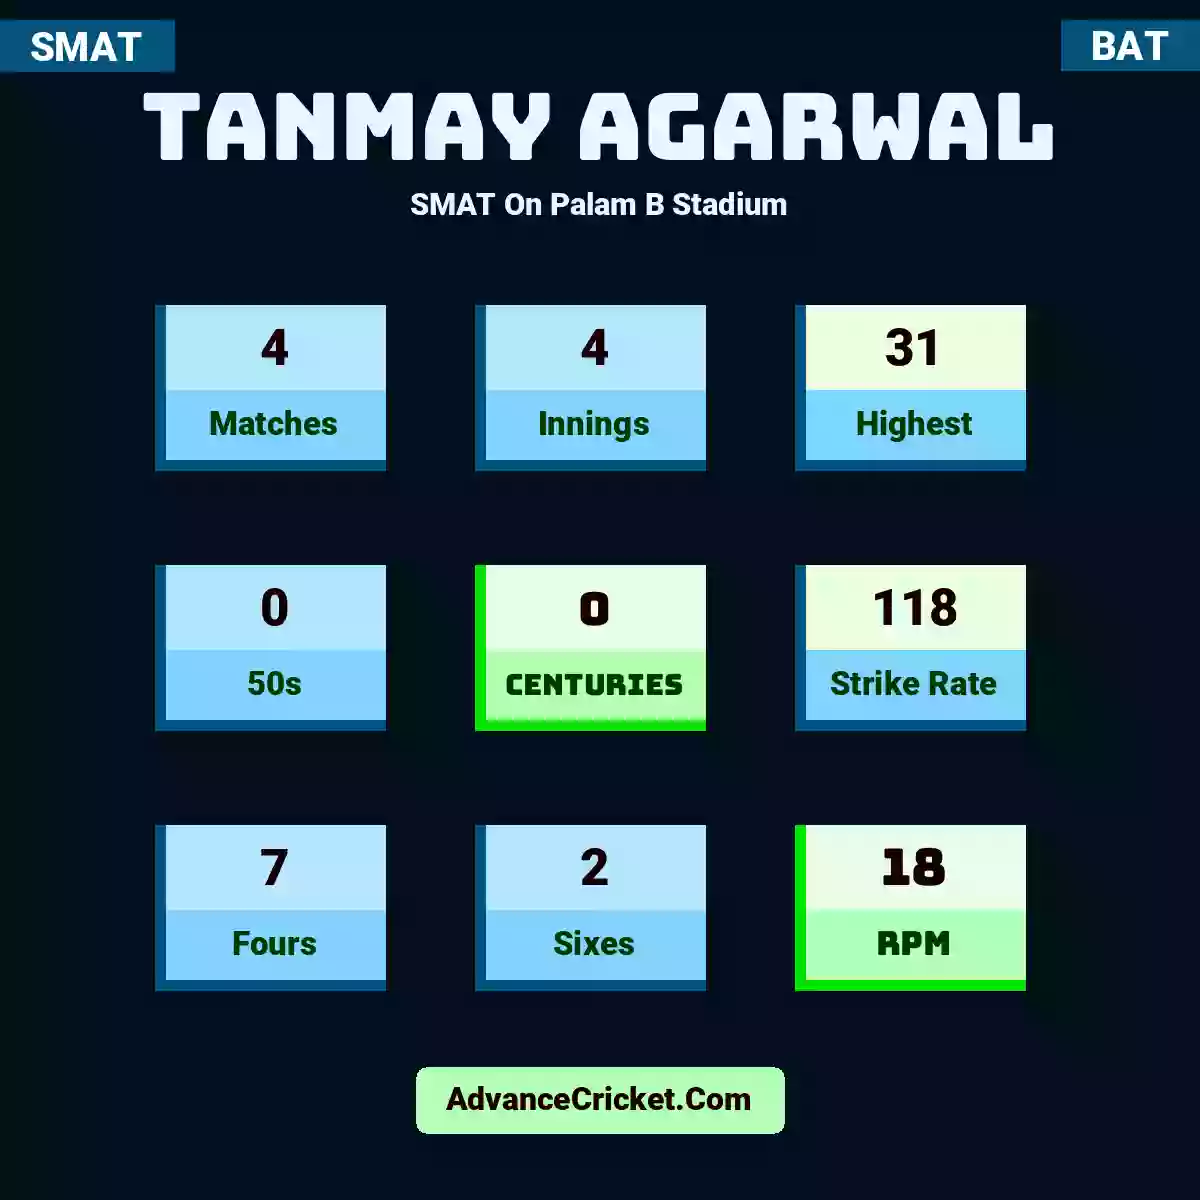 Tanmay Agarwal SMAT  On Palam B Stadium, Tanmay Agarwal played 4 matches, scored 31 runs as highest, 0 half-centuries, and 0 centuries, with a strike rate of 118. T.Agarwal hit 7 fours and 2 sixes, with an RPM of 18.